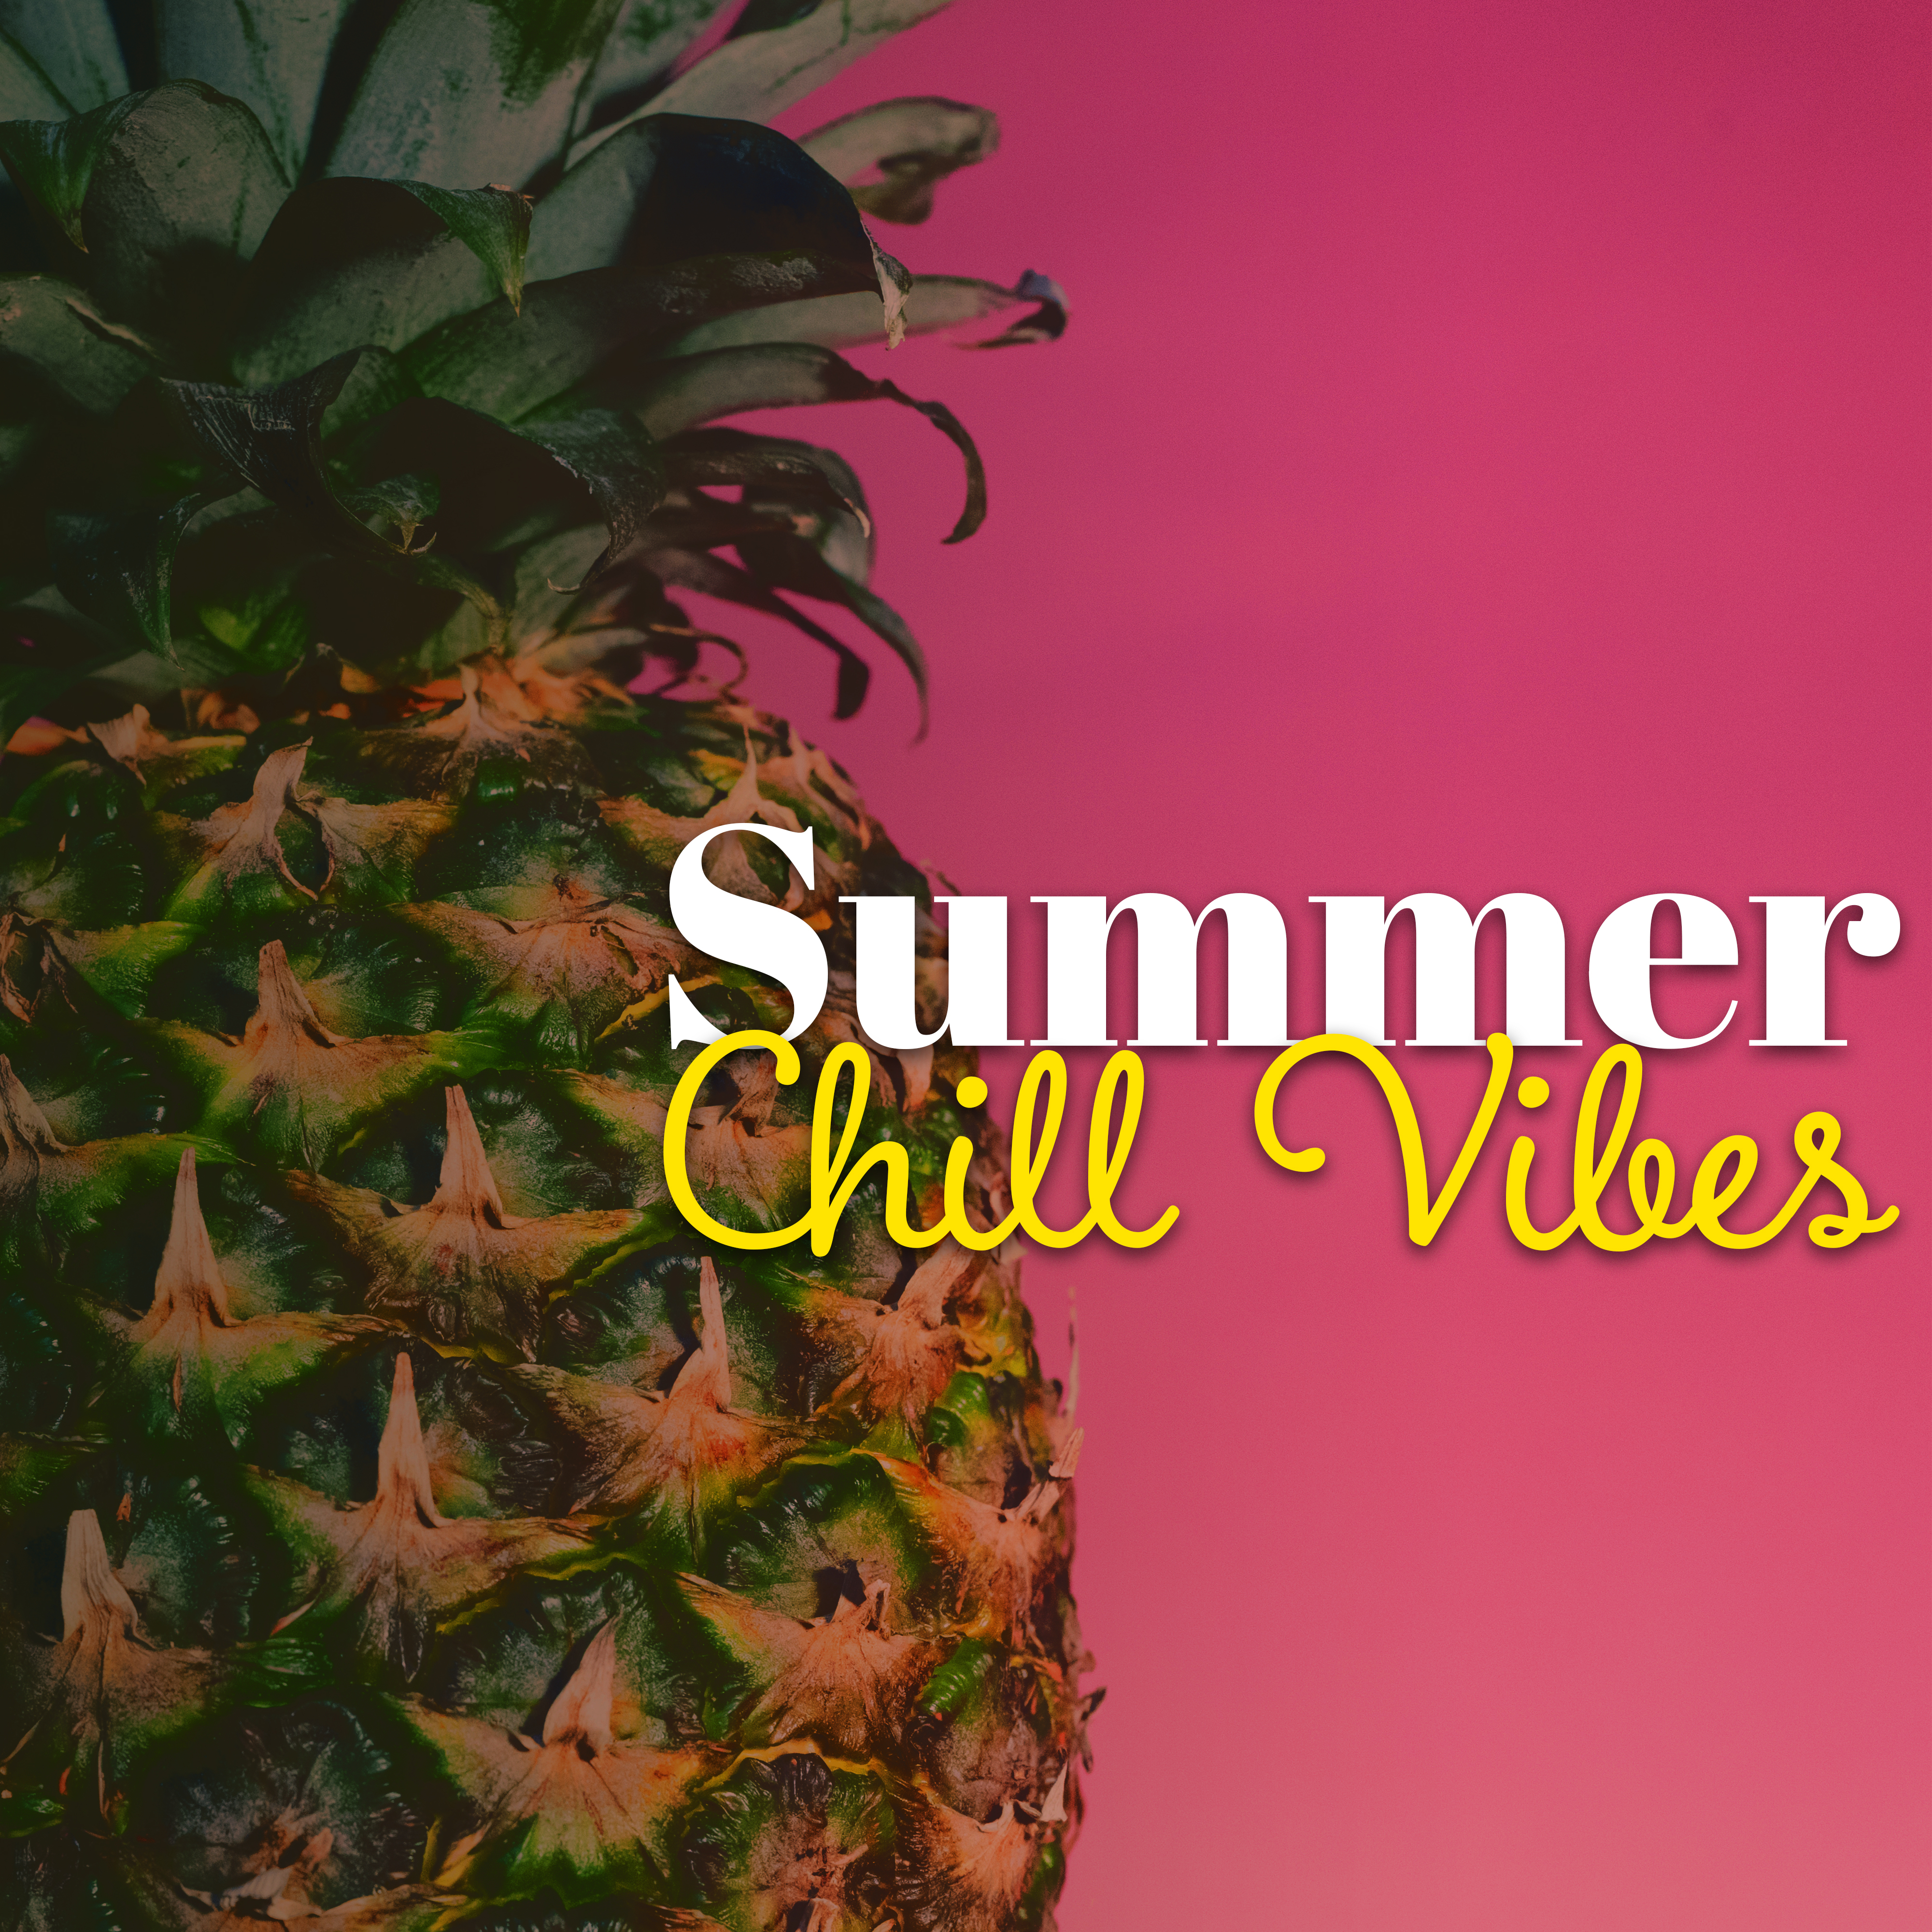 Summer Chill Vibes  Calming Sounds, Chill Out Memories, Summer 2017, Holiday Music